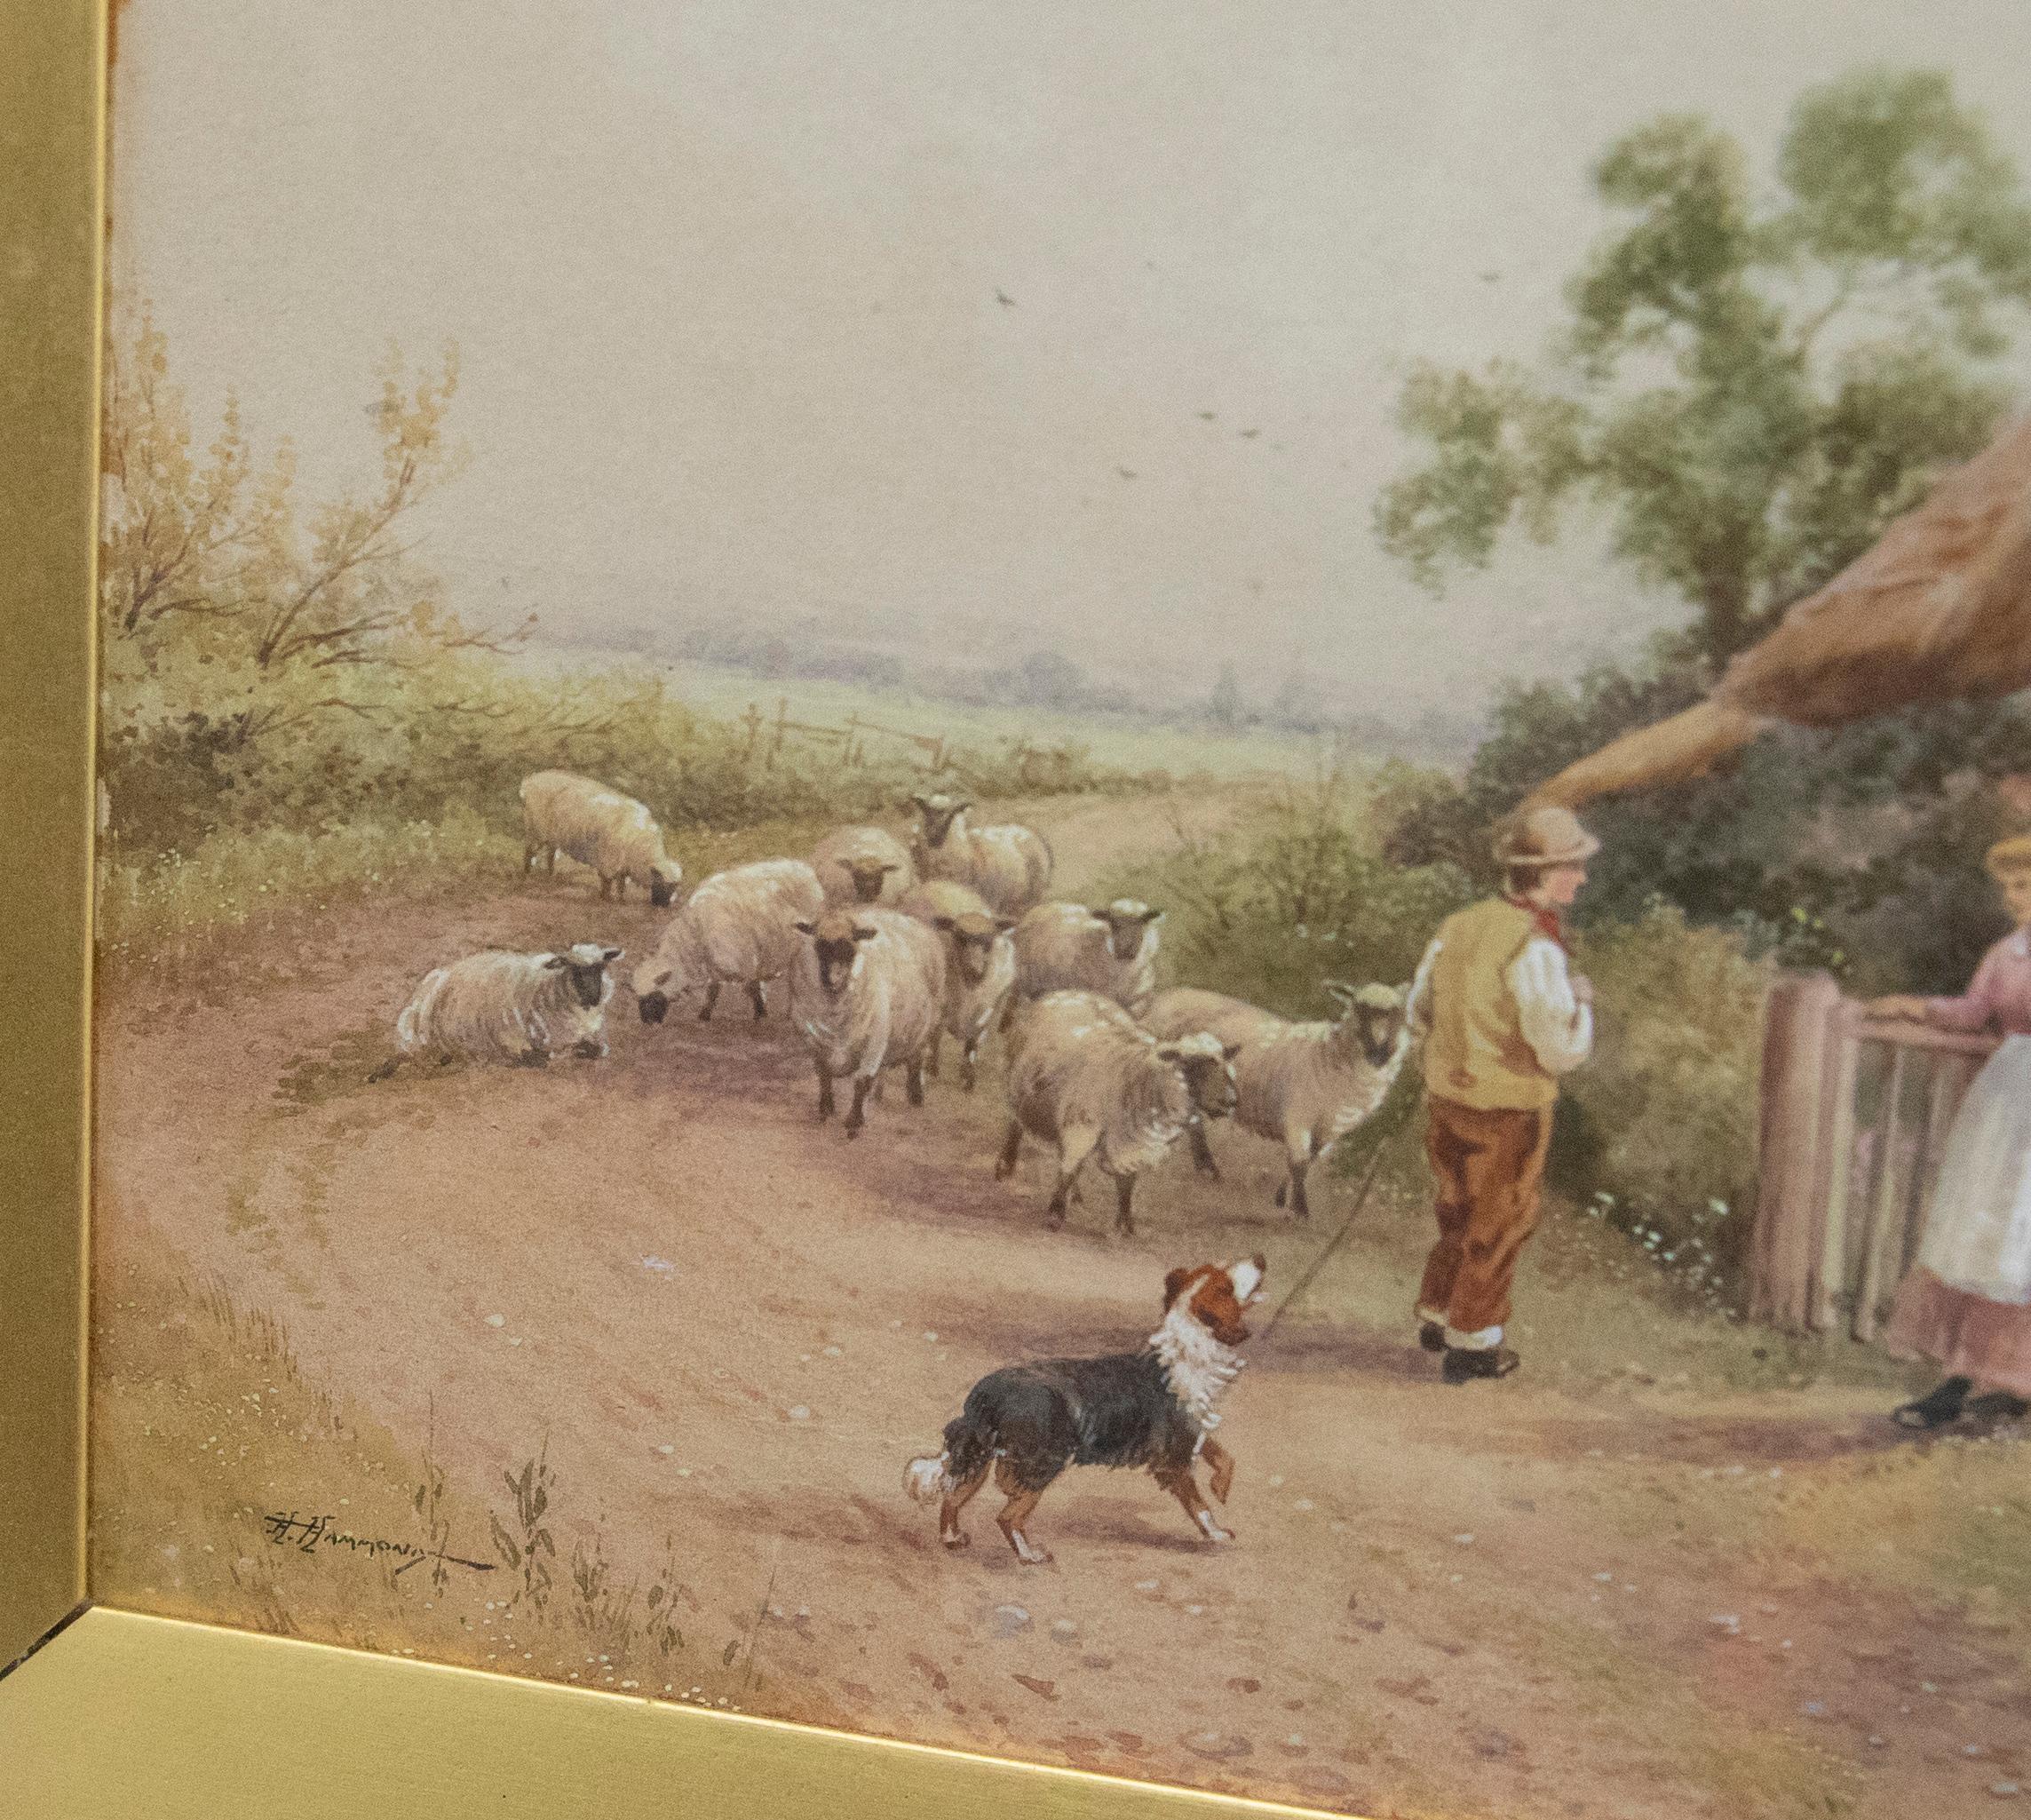 A delightful rural scene by the British artist Horace Hammond (1842-1926). Well-presented in an ornate gilt-effect frame with swept rails and internal slip. Inscribed H. Hammond to the lower rail and signed by the artist to the lower left. On paper.